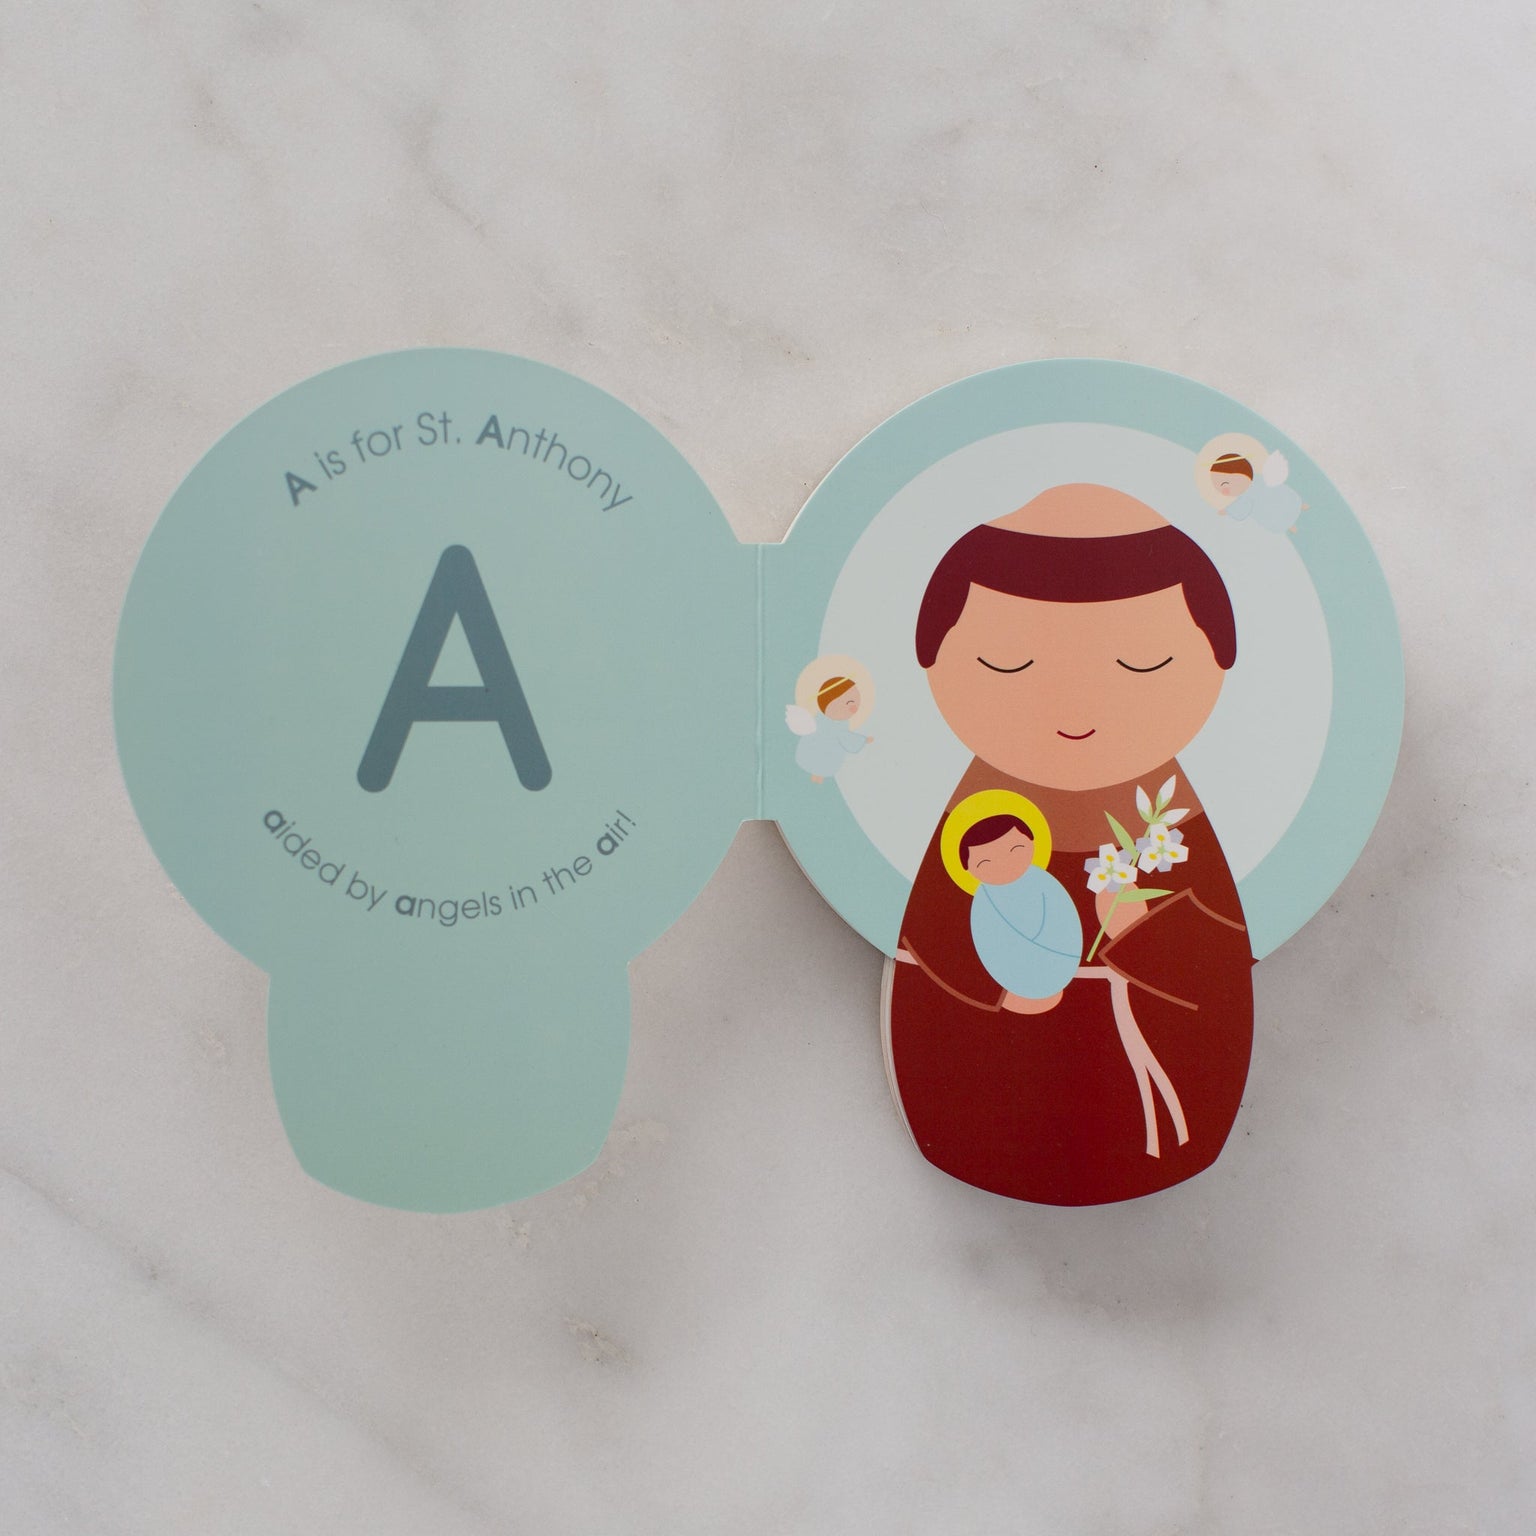 Come and See: Saints A to Z - An Alphabet of Catholic Saints - shaped board book